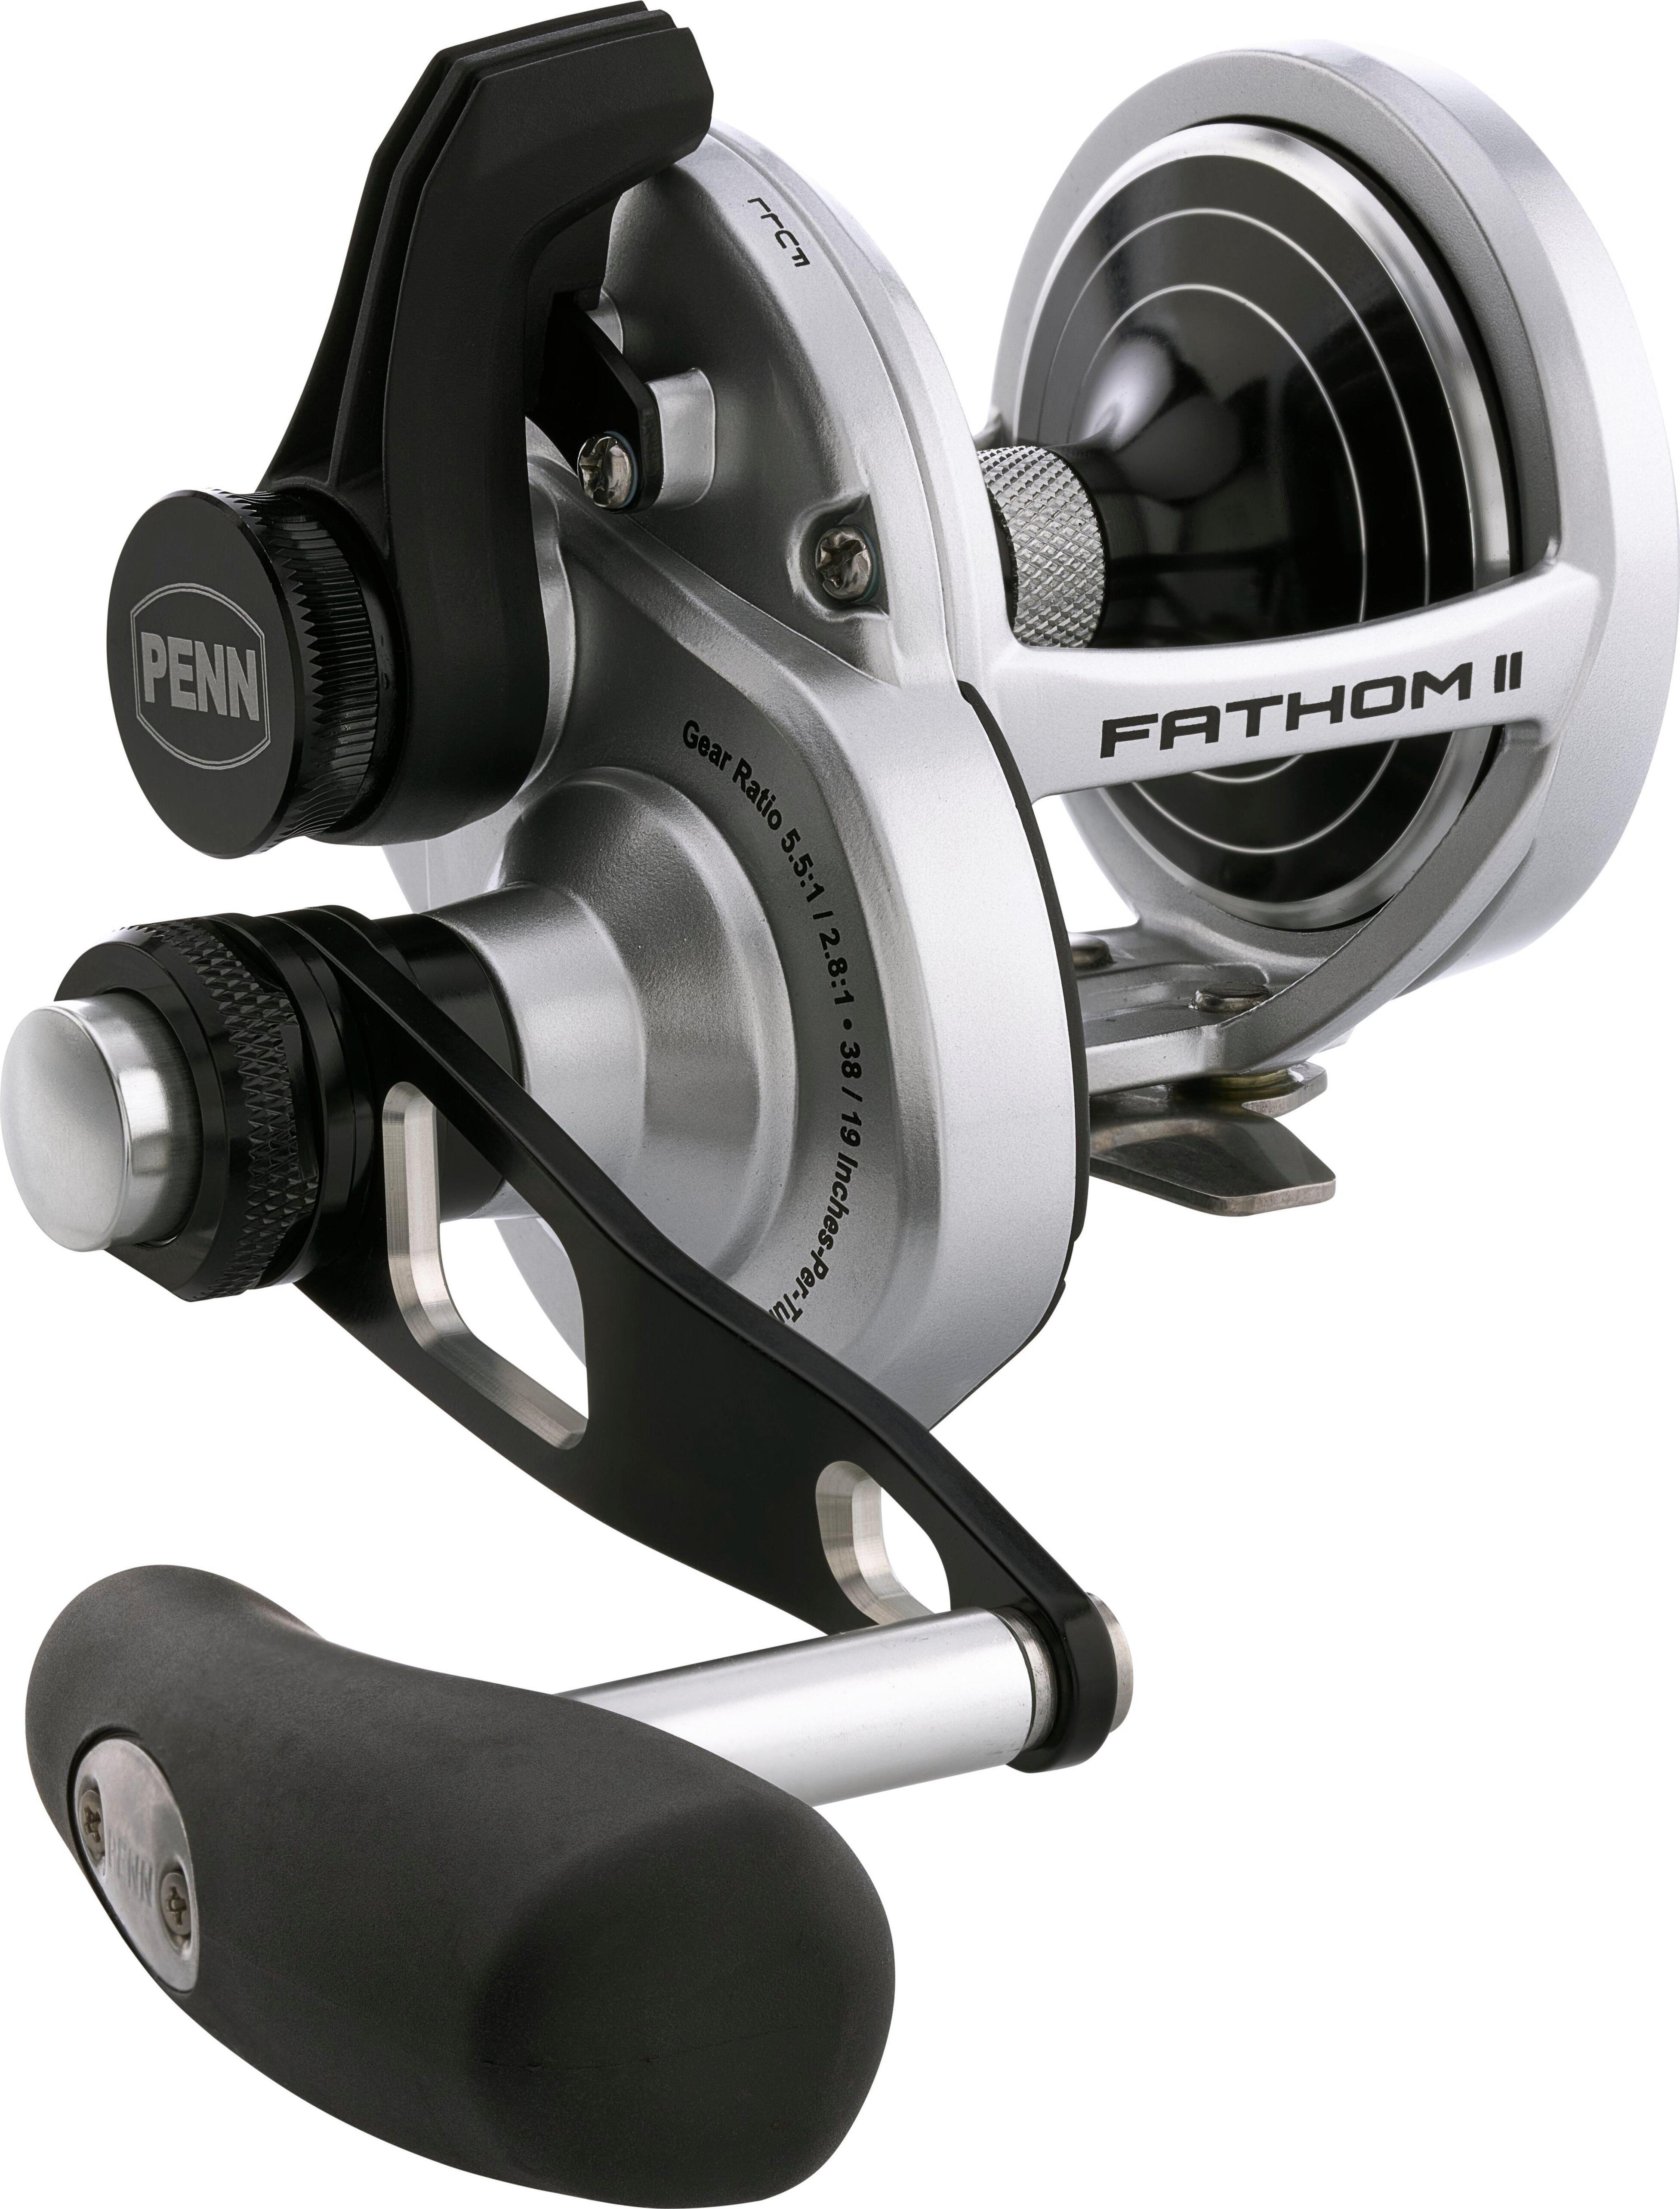 PENN Fathom II Lever Drag 2 Speed Multipliers – Glasgow Angling Centre